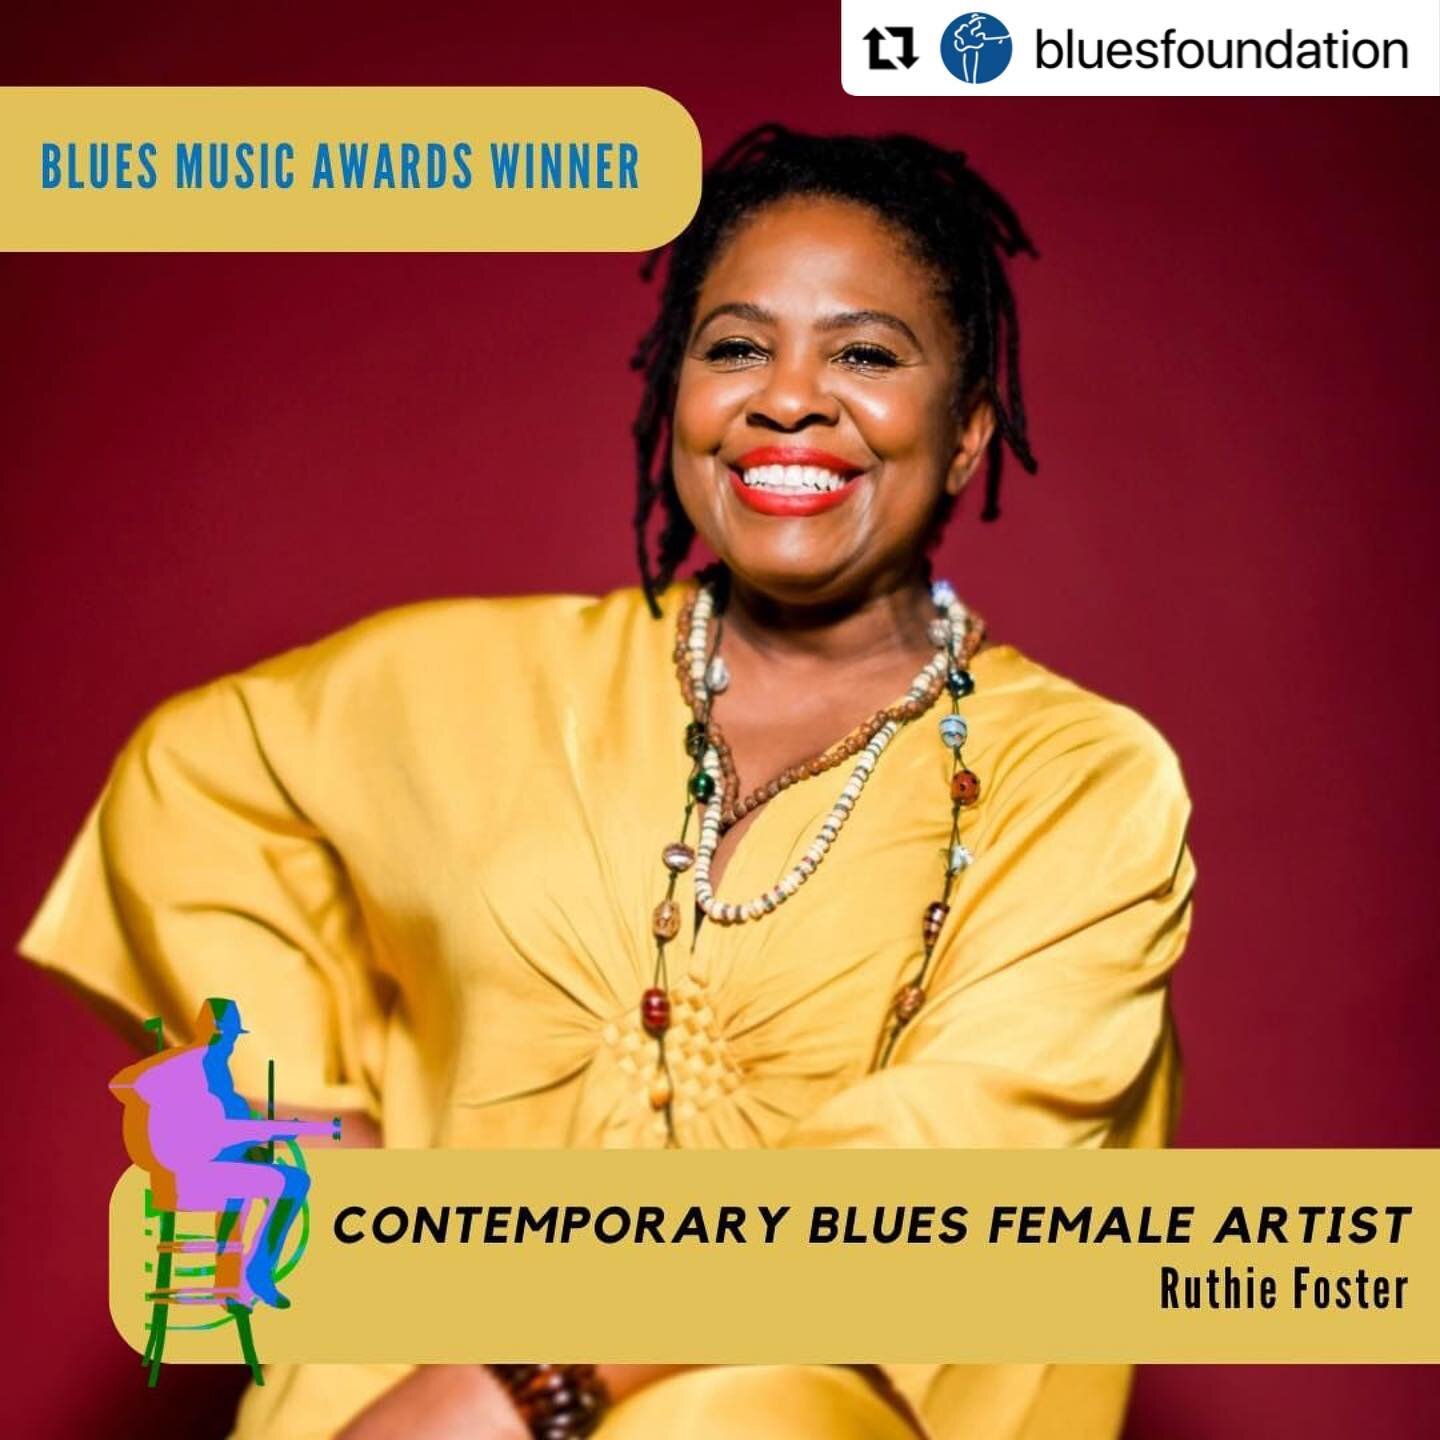 Thank you @bluesfoundation !!! 🎉
・・・
#Repost And the 2023 #BMAs award for Contemporary Blues Female Artist goes to&hellip; Ruthie Foster!
🏆: @ruthiefostermusic
#bluesmusicawards